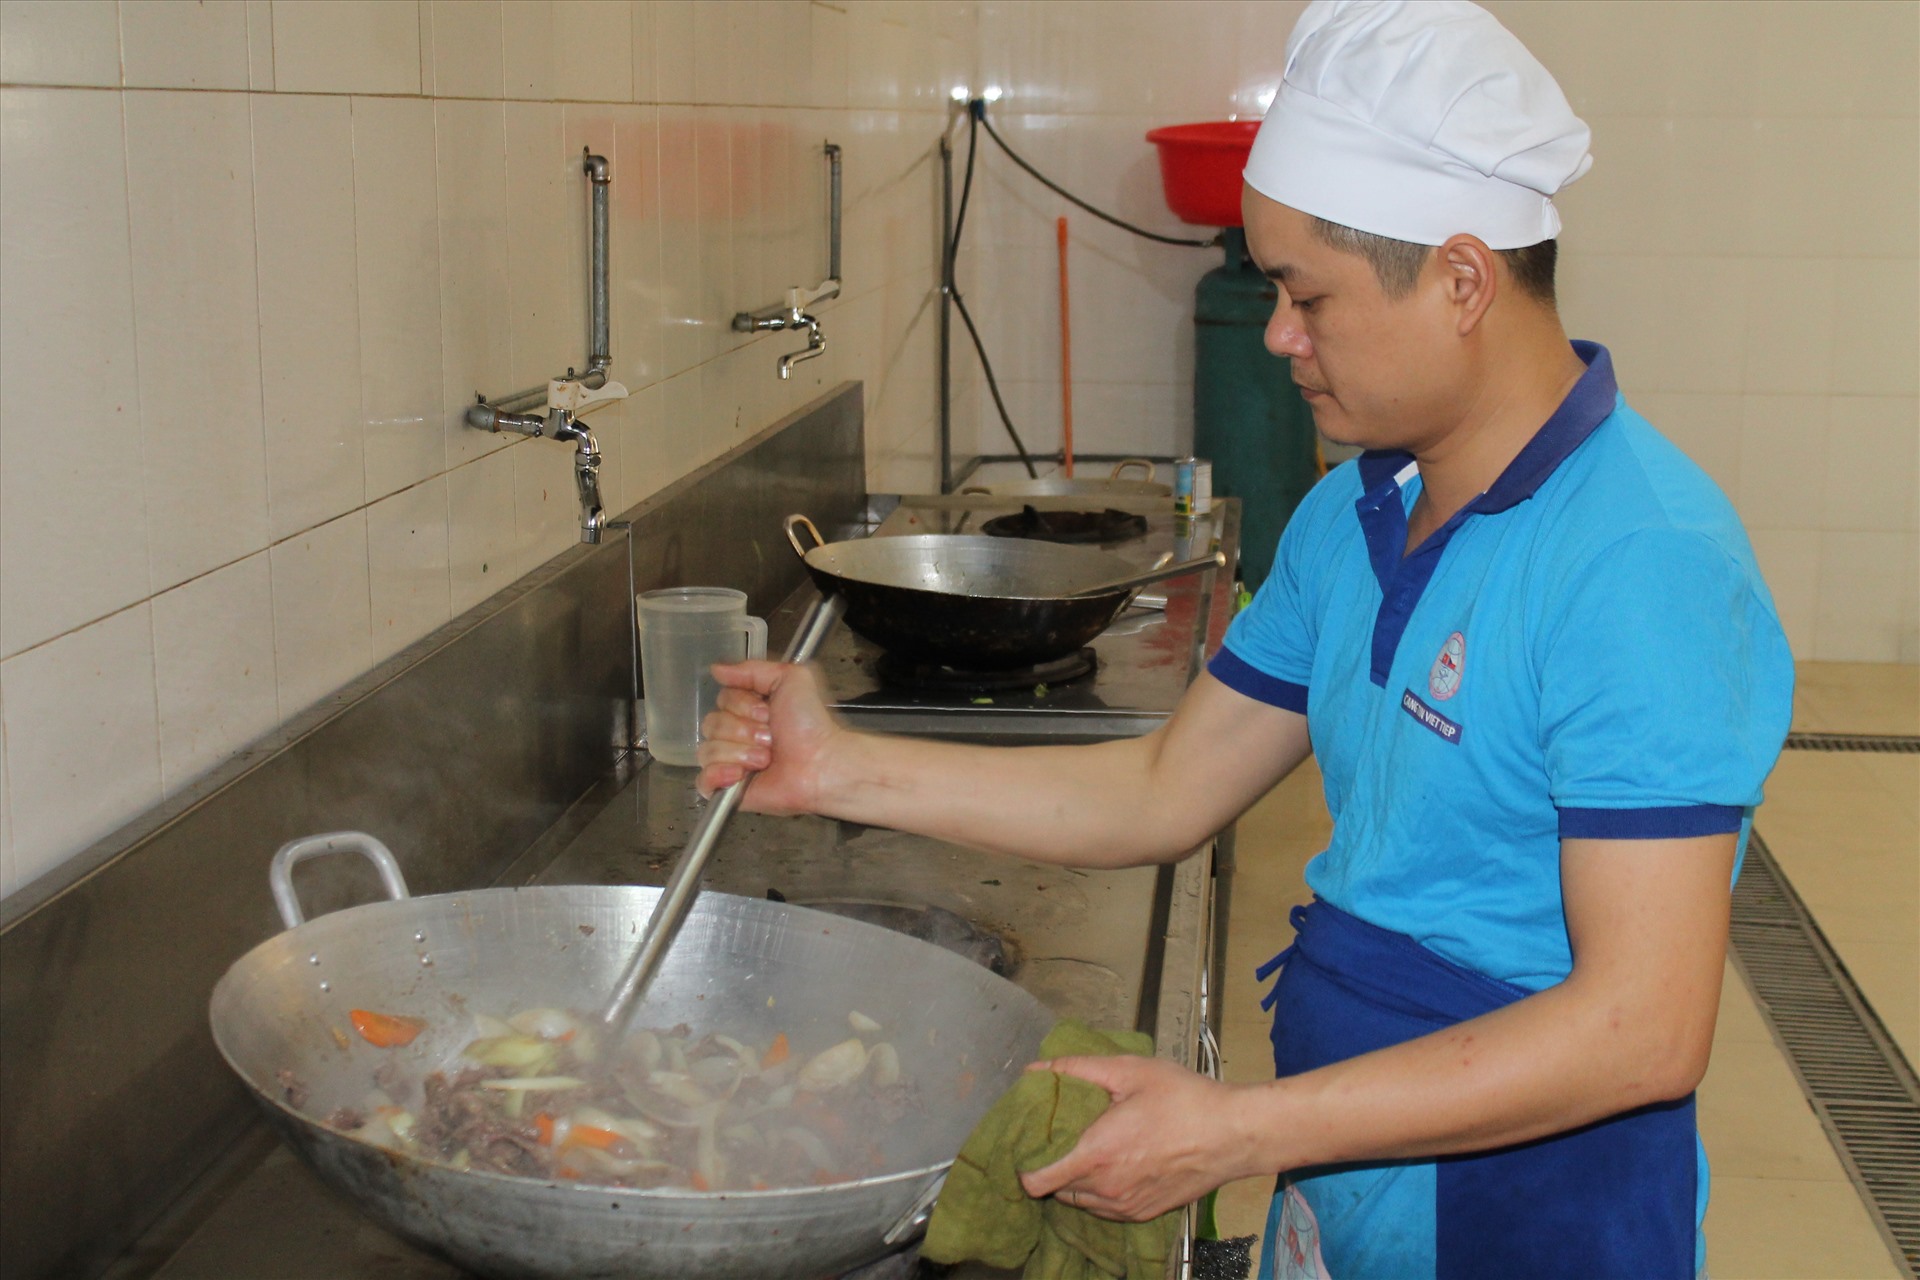 The meals are prepared by staff at the Viet-Tiep Friendship Hospital